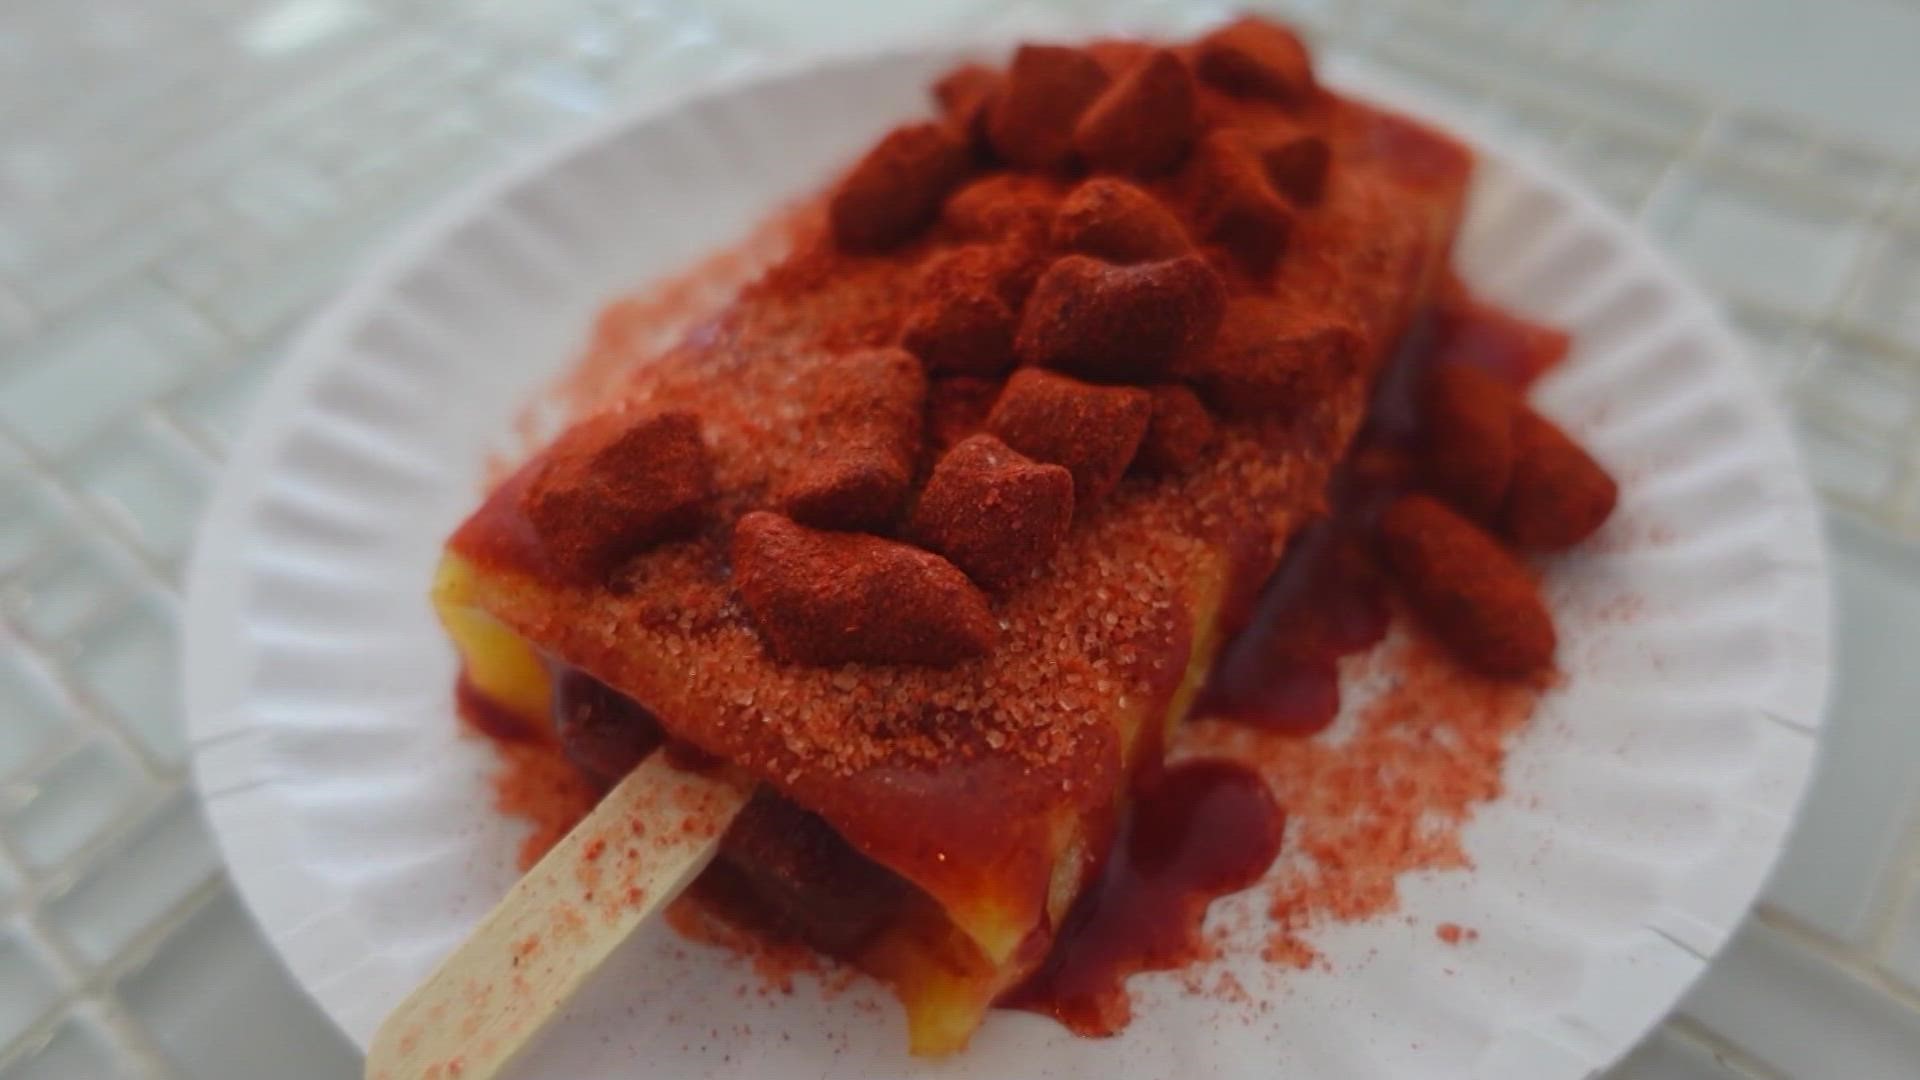 A San Antonio paleta business has more than three dozen flavors of tasty treats, from which to choose, but they can also give them an extra twist.